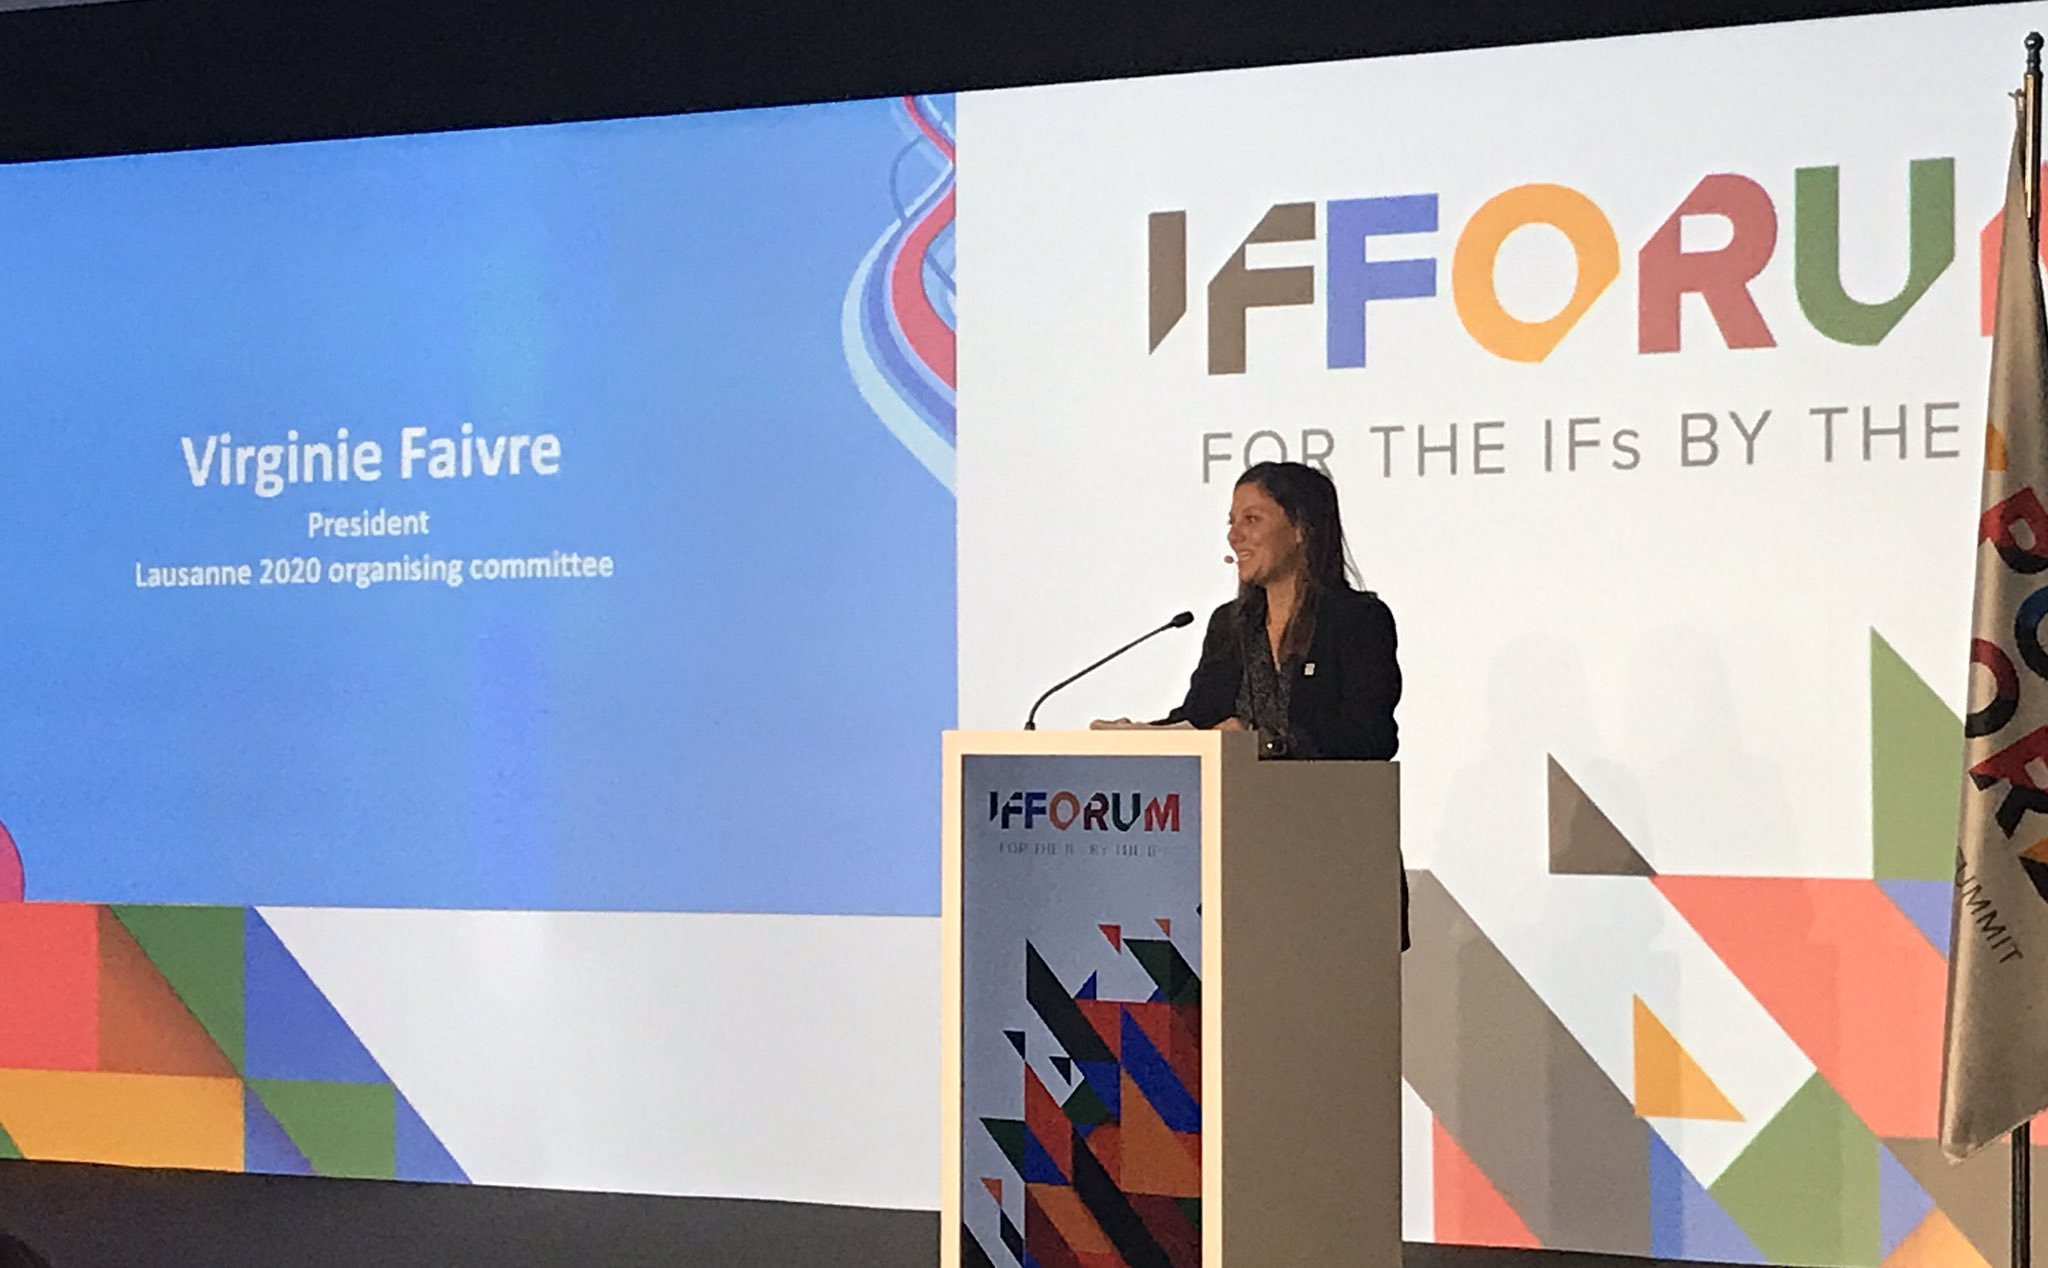 Virginie Faivre, President of next year's Winter Youth Olympic Games in Lausanne, was among the other leading speakers on the opening day of the IF Forum ©Twitter